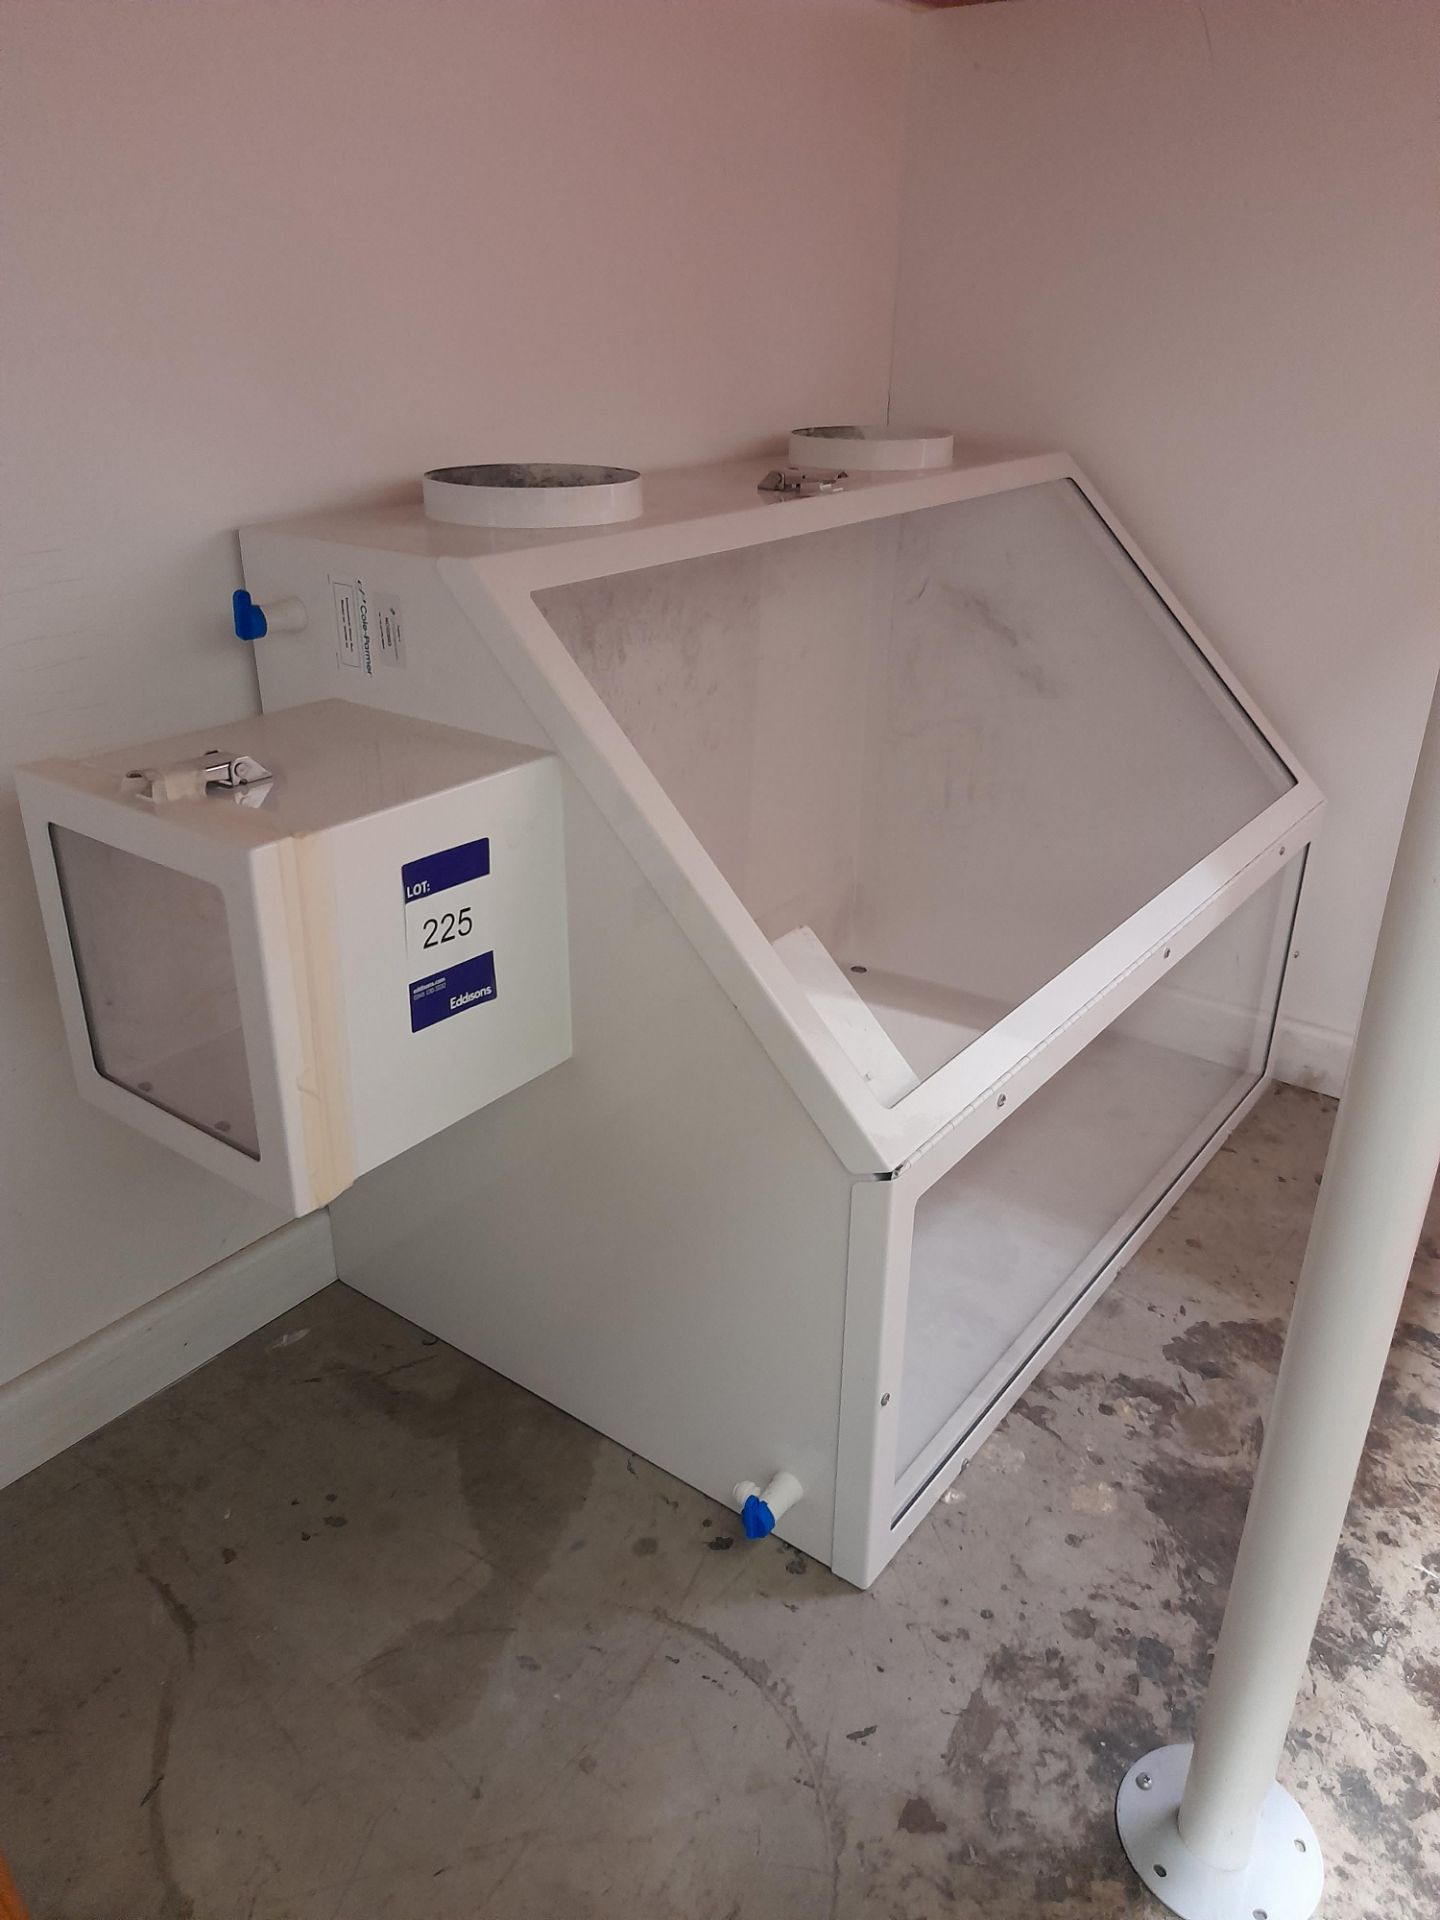 Cole-Parmer desktop inspection cabinet, Approx. 840mm x 520mm x 600mm (not installed)